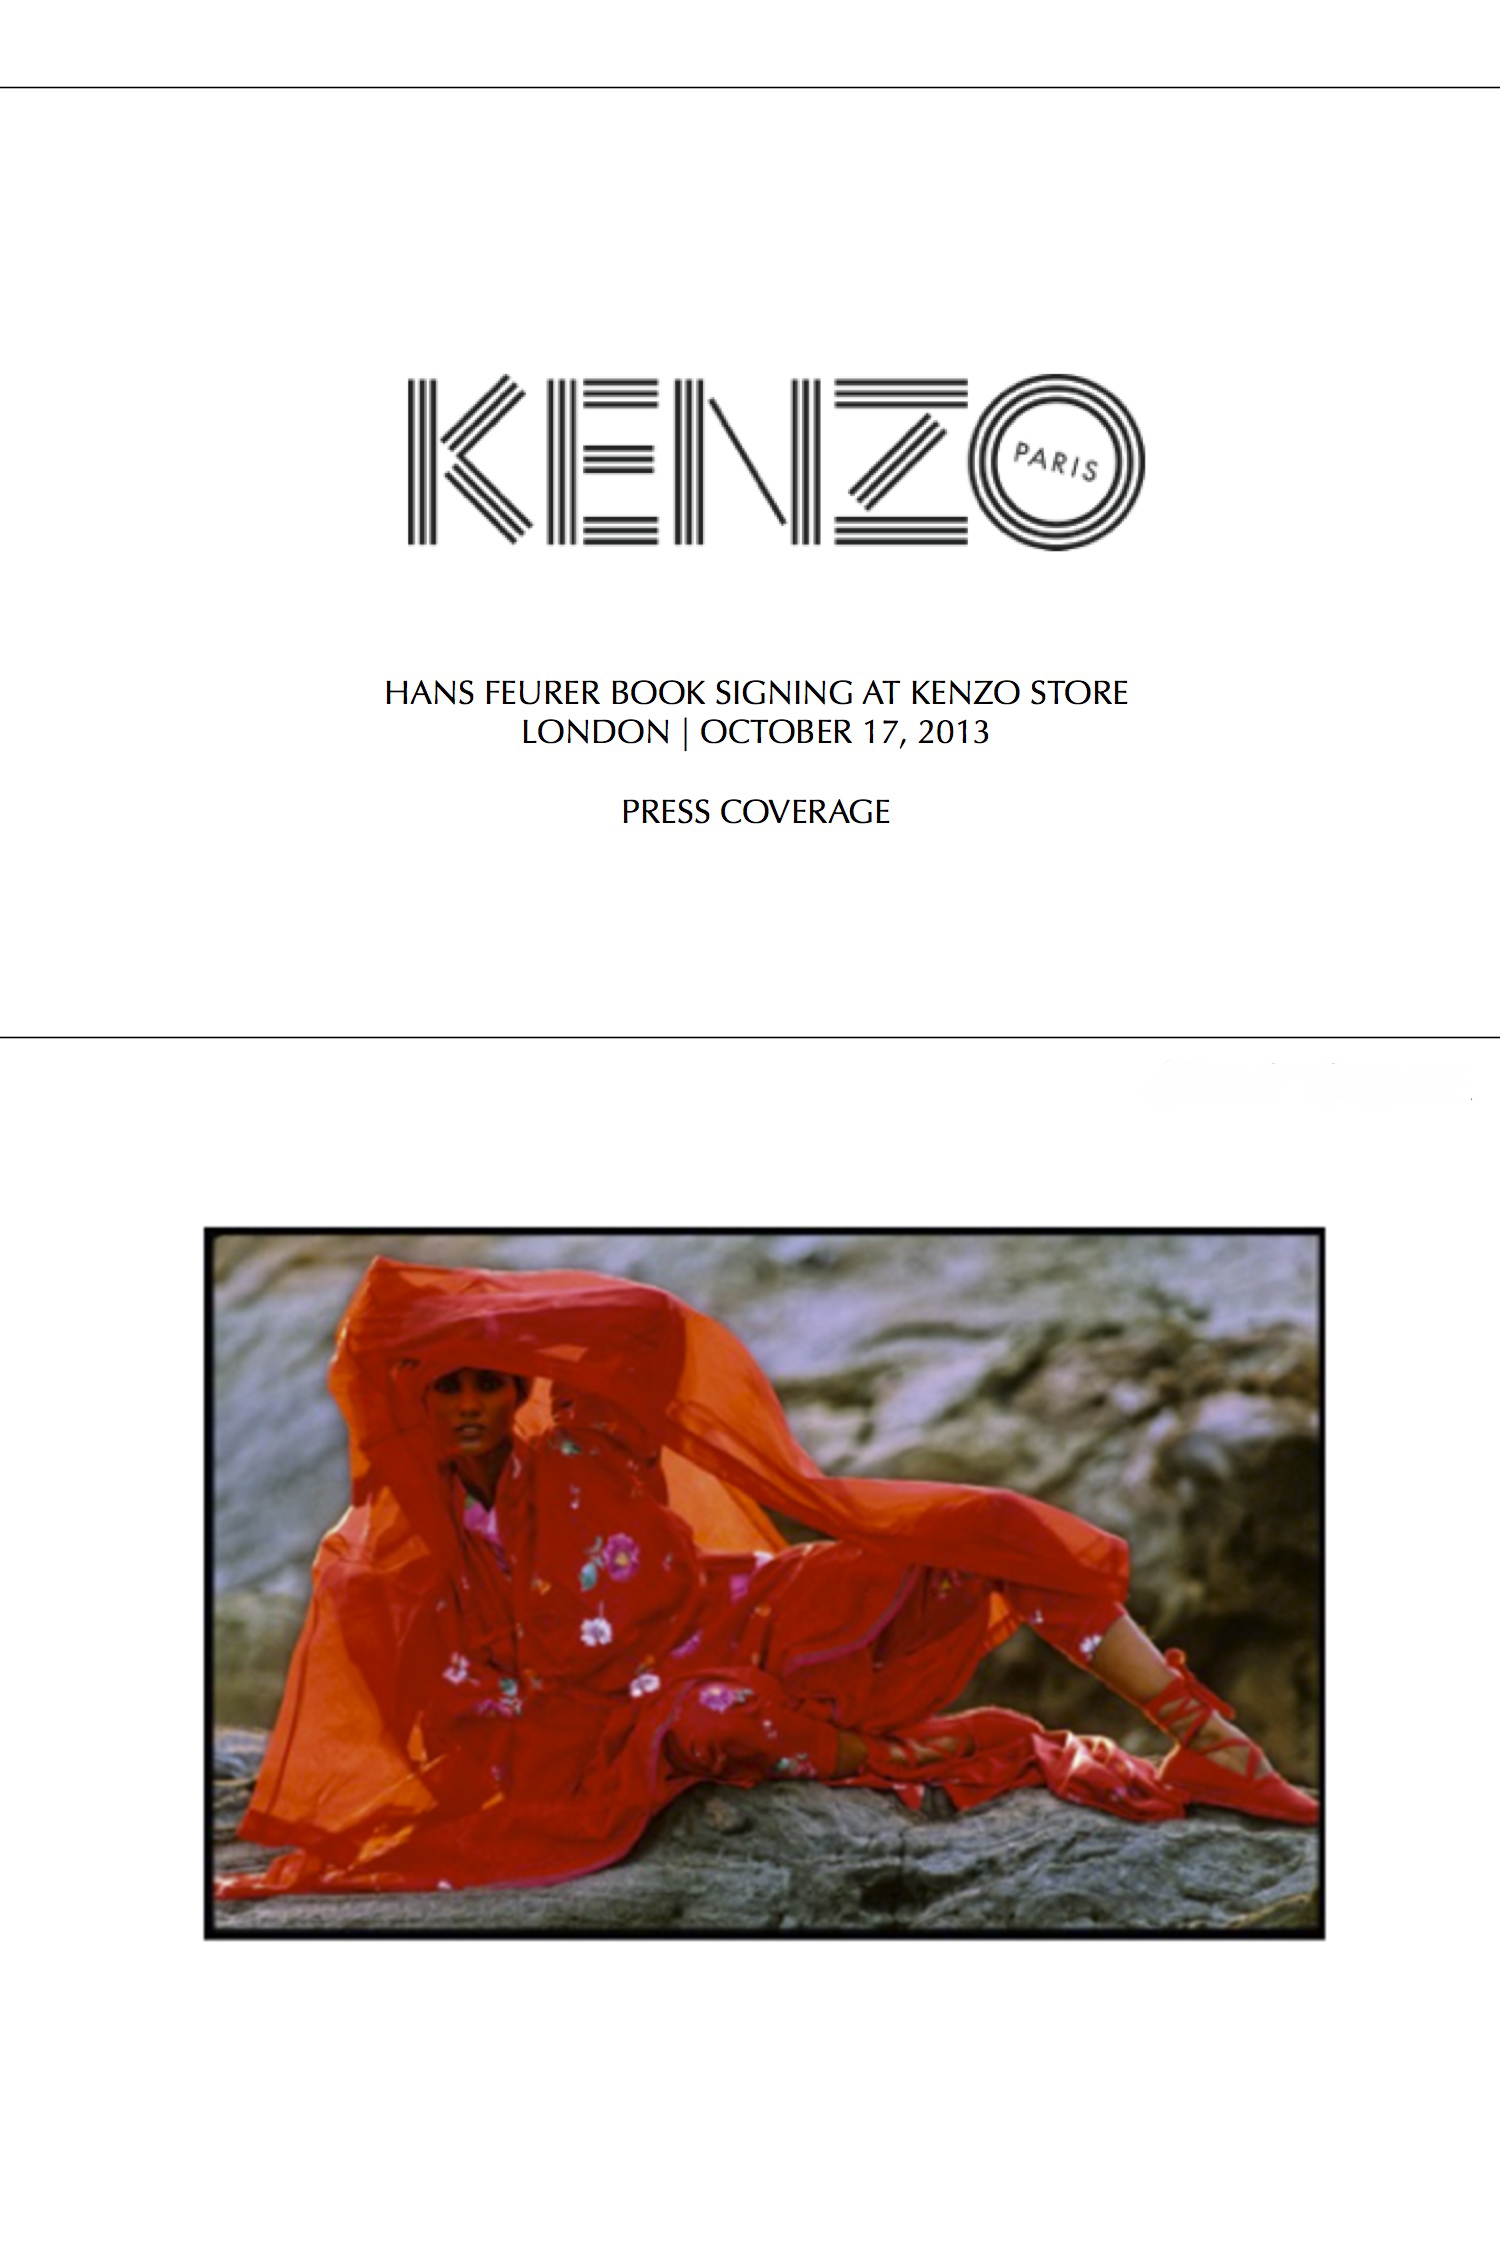 KENZO x HANS FEURER - LONDON STORE BOOK SIGNING - OCT 17 - PRESS COVERAGE copie